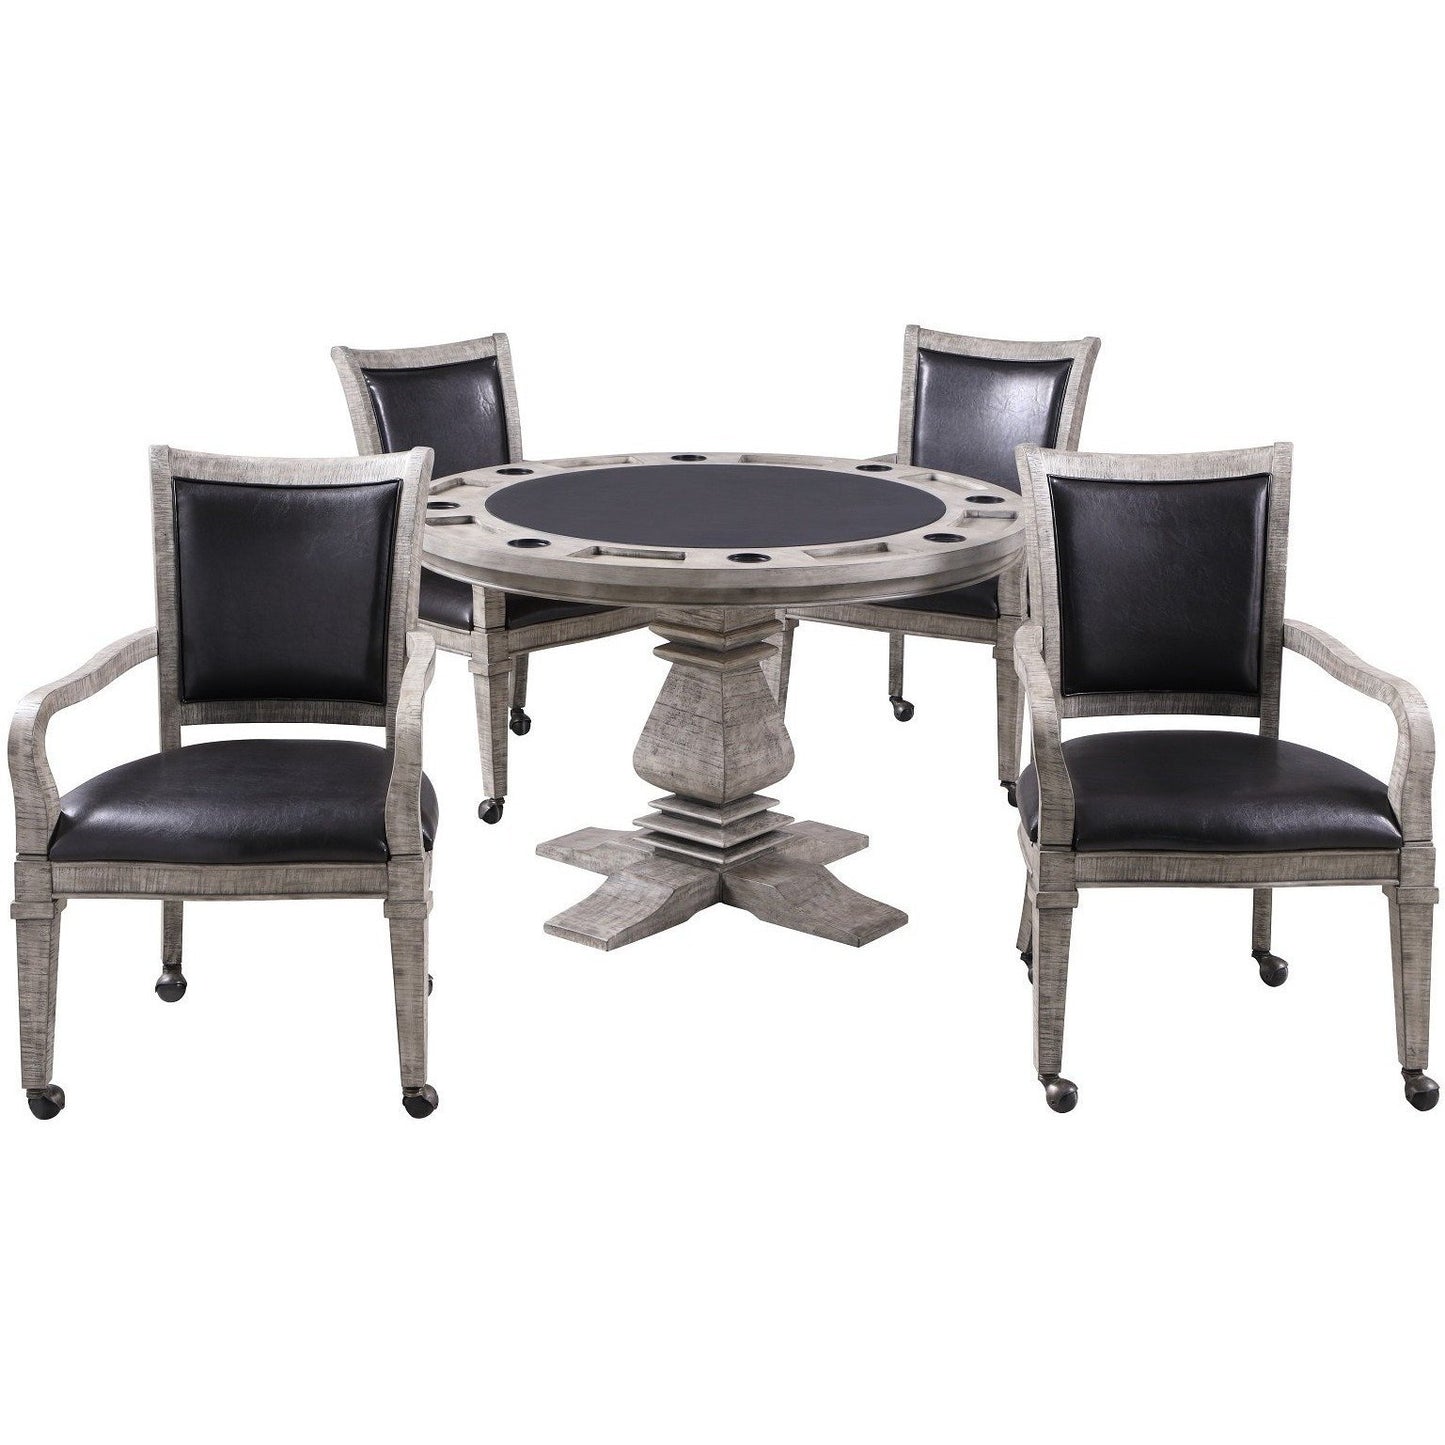 Hathaway Montecito Driftwood Poker Dining Arm Chair Set - Just Poker Tables